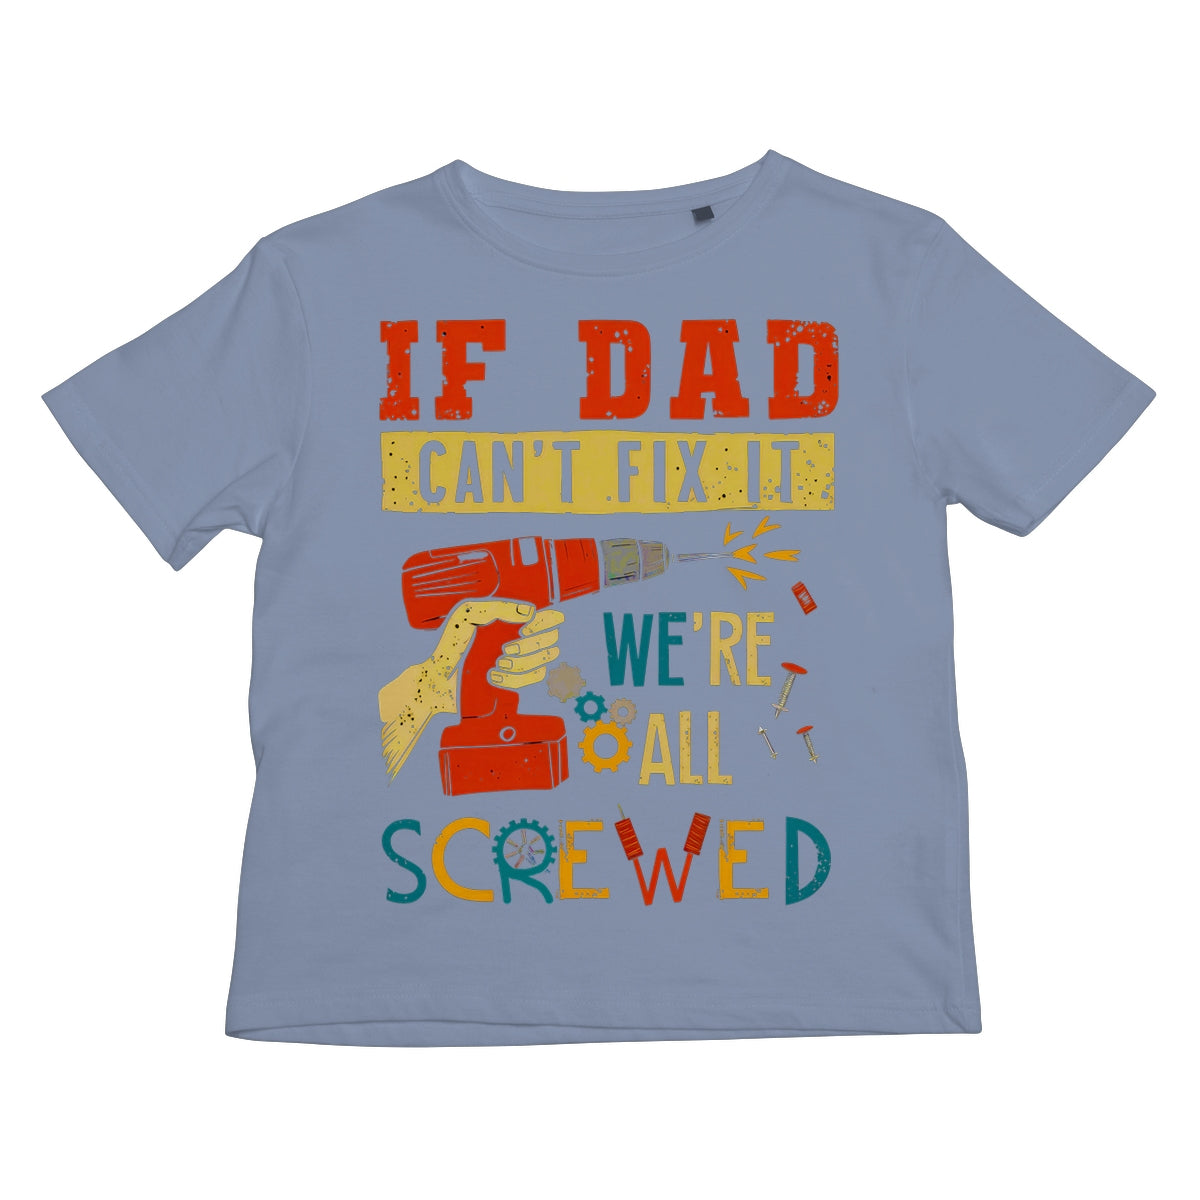 If Dad Csm't Fit It We Are All Screwed Kids T-Shirt